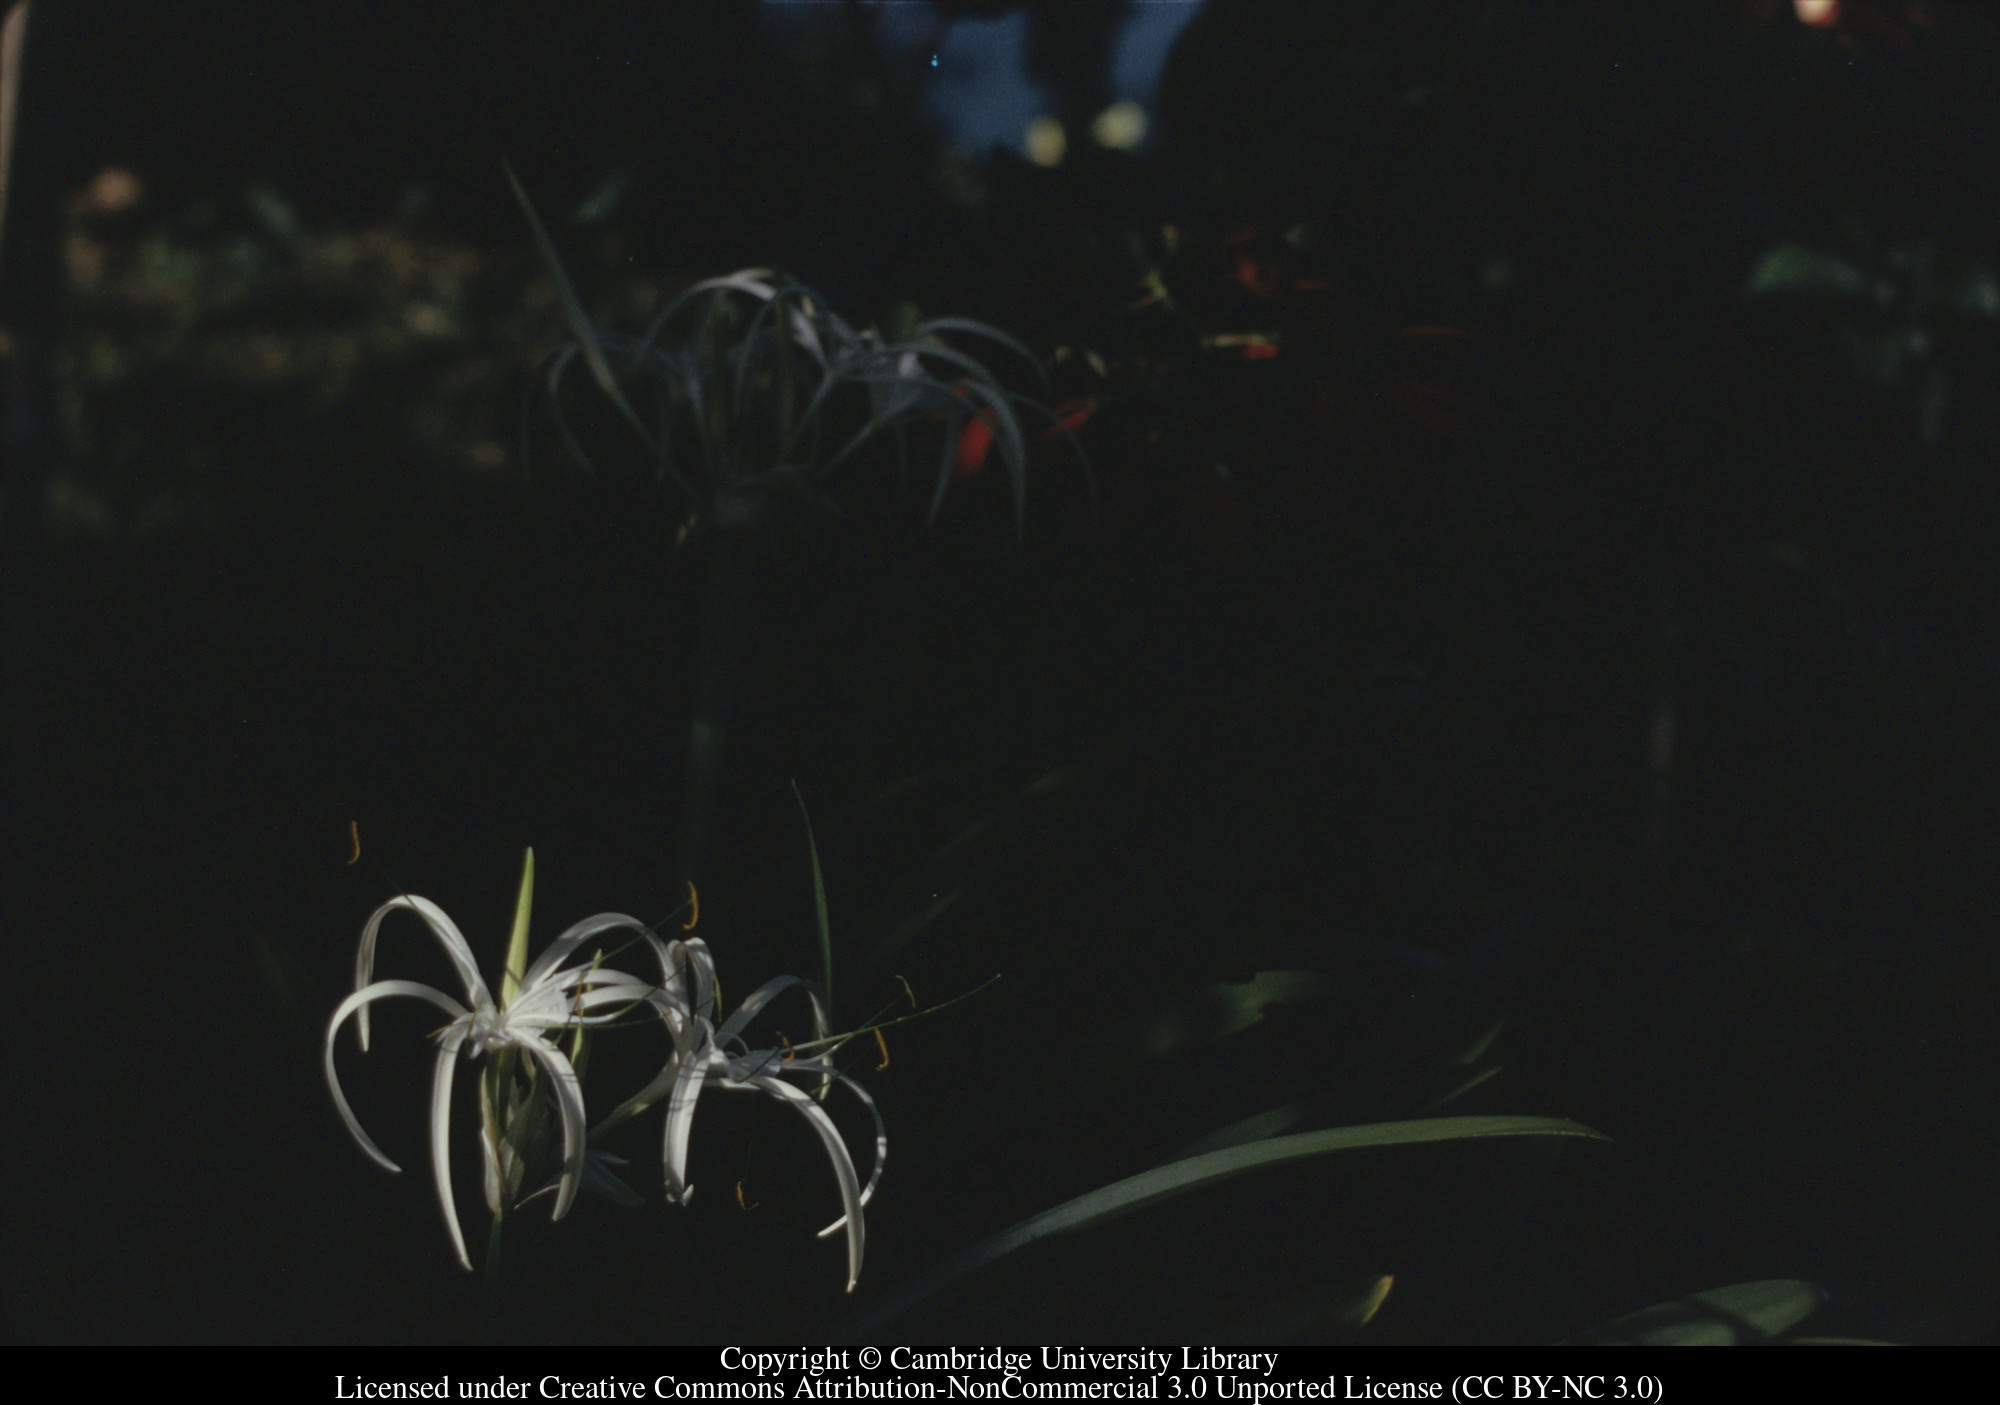 Spider Lily (Crinum) early morning, C [Ciceron], 1971-02